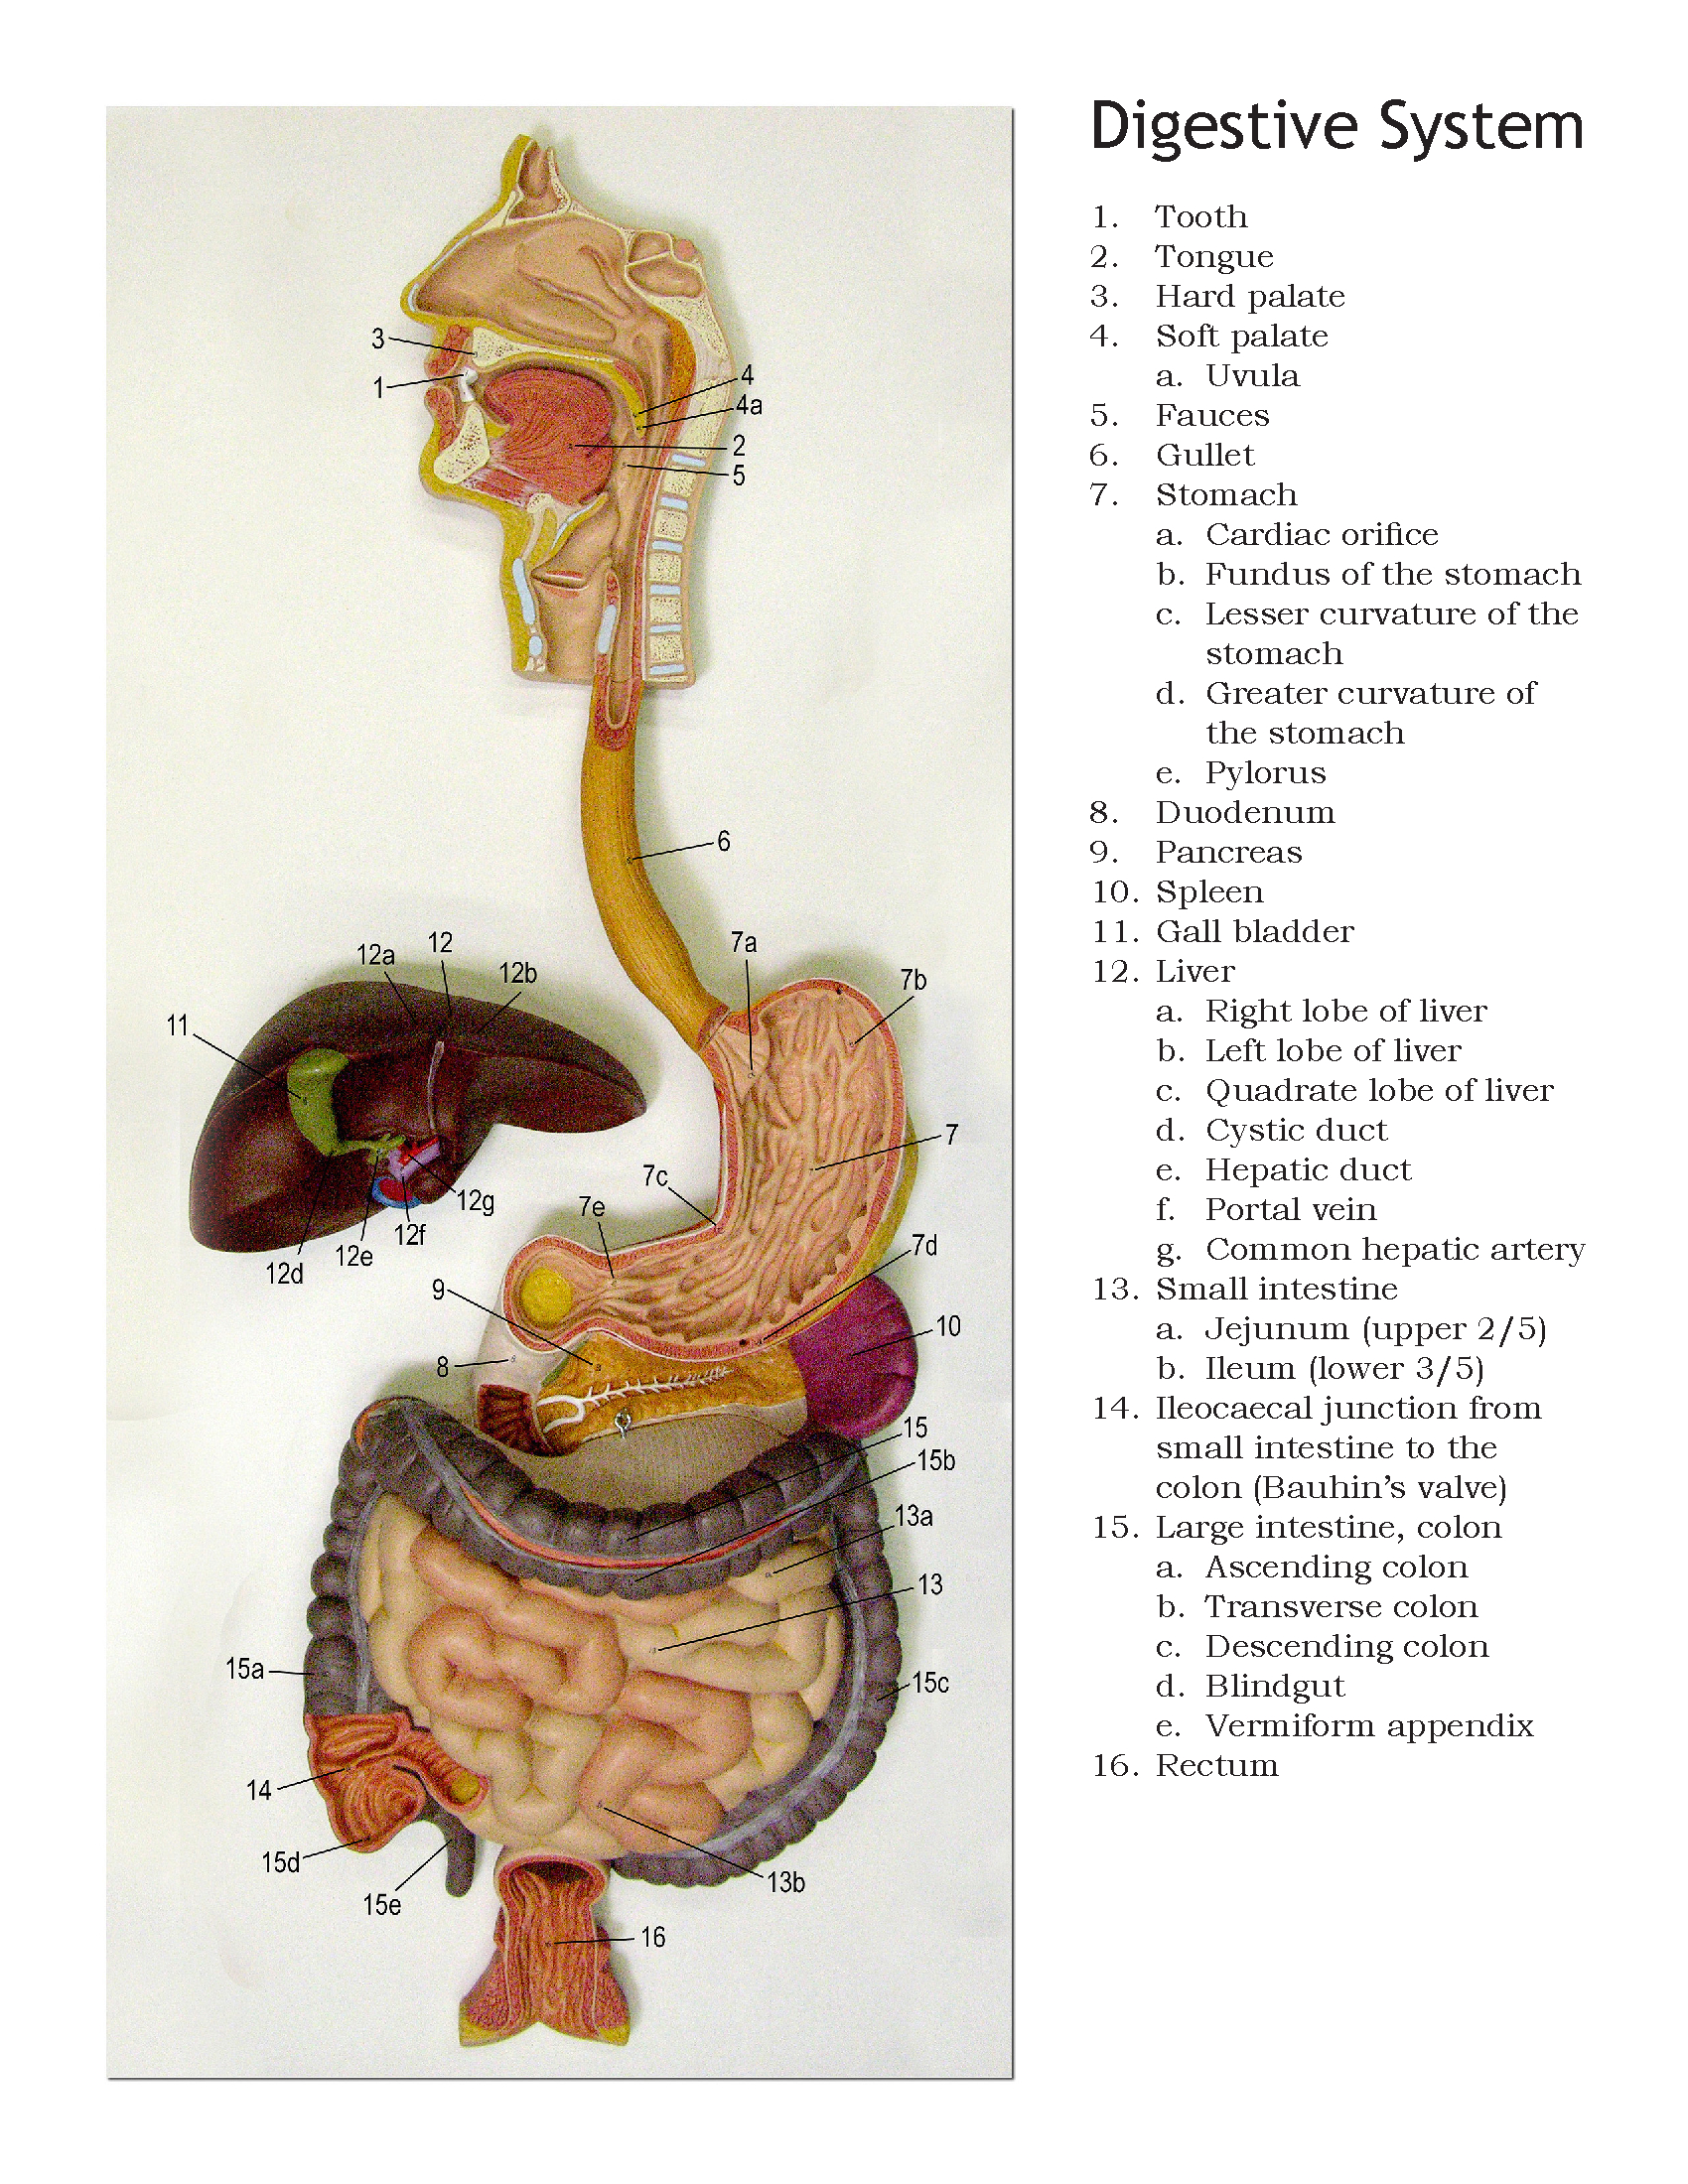 Diagram Of The Digestive System Human Digestive System Diagram Anatomical Models Ball State